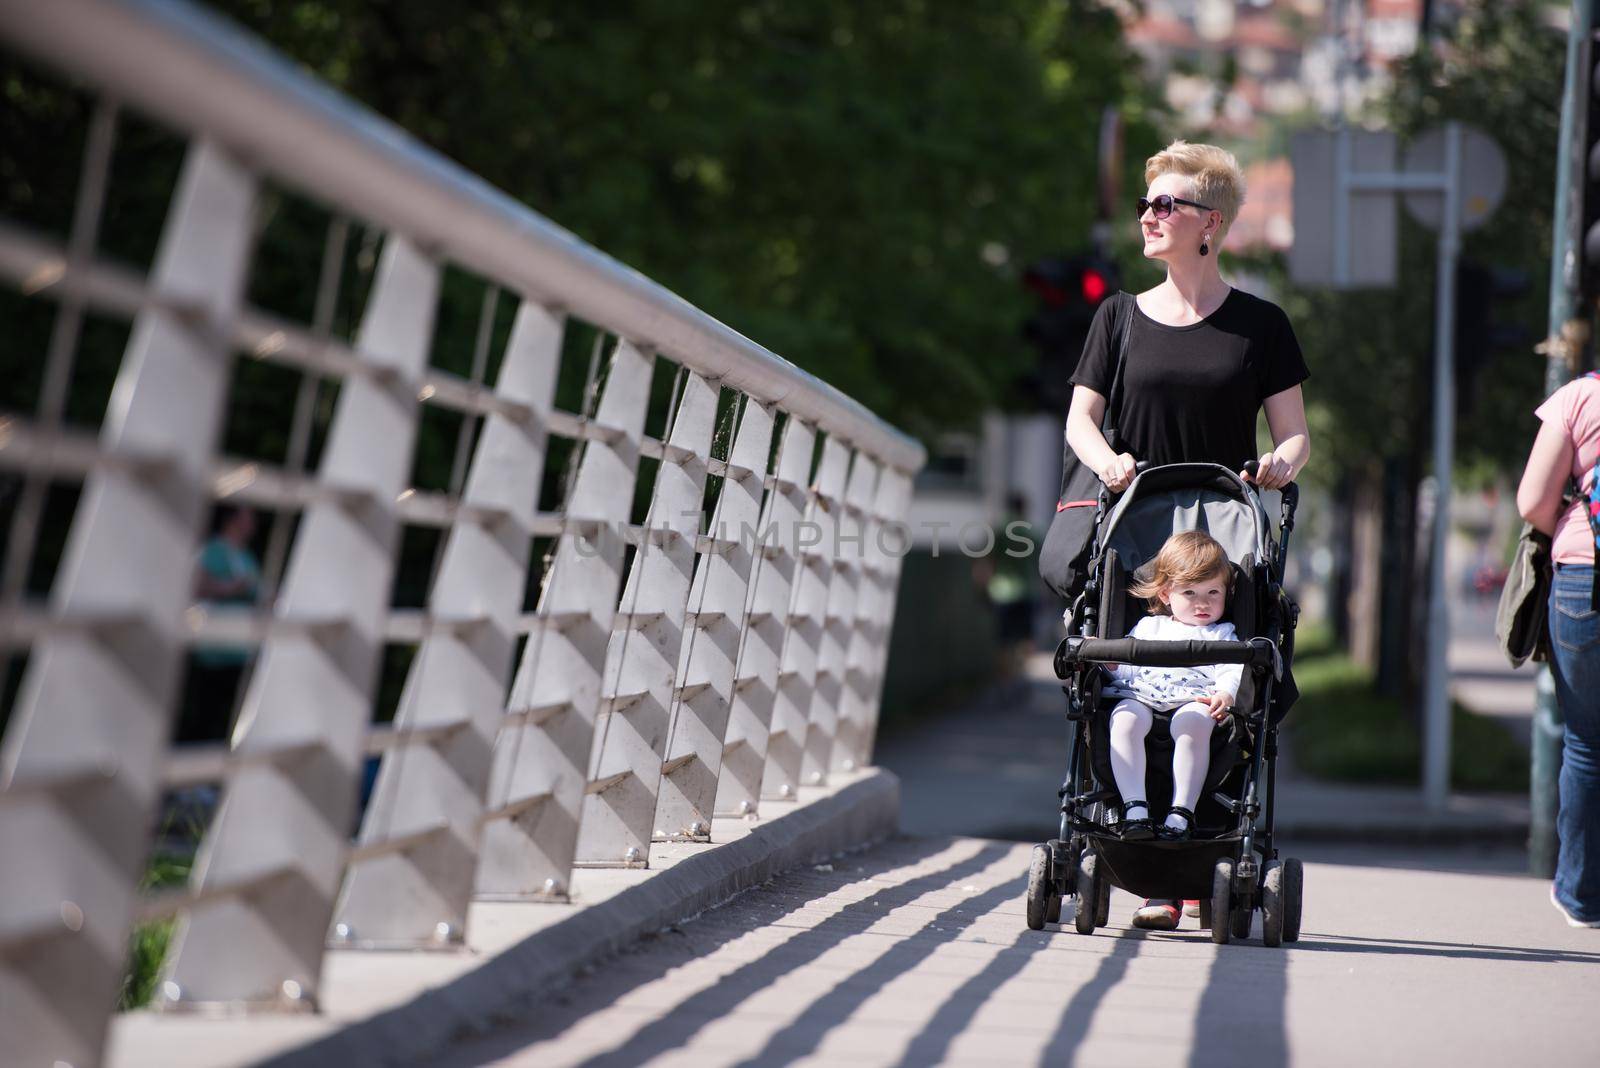 beautiful young mother with blond hair and sunglasses pushed her baby daughter in a stroller on a summer day